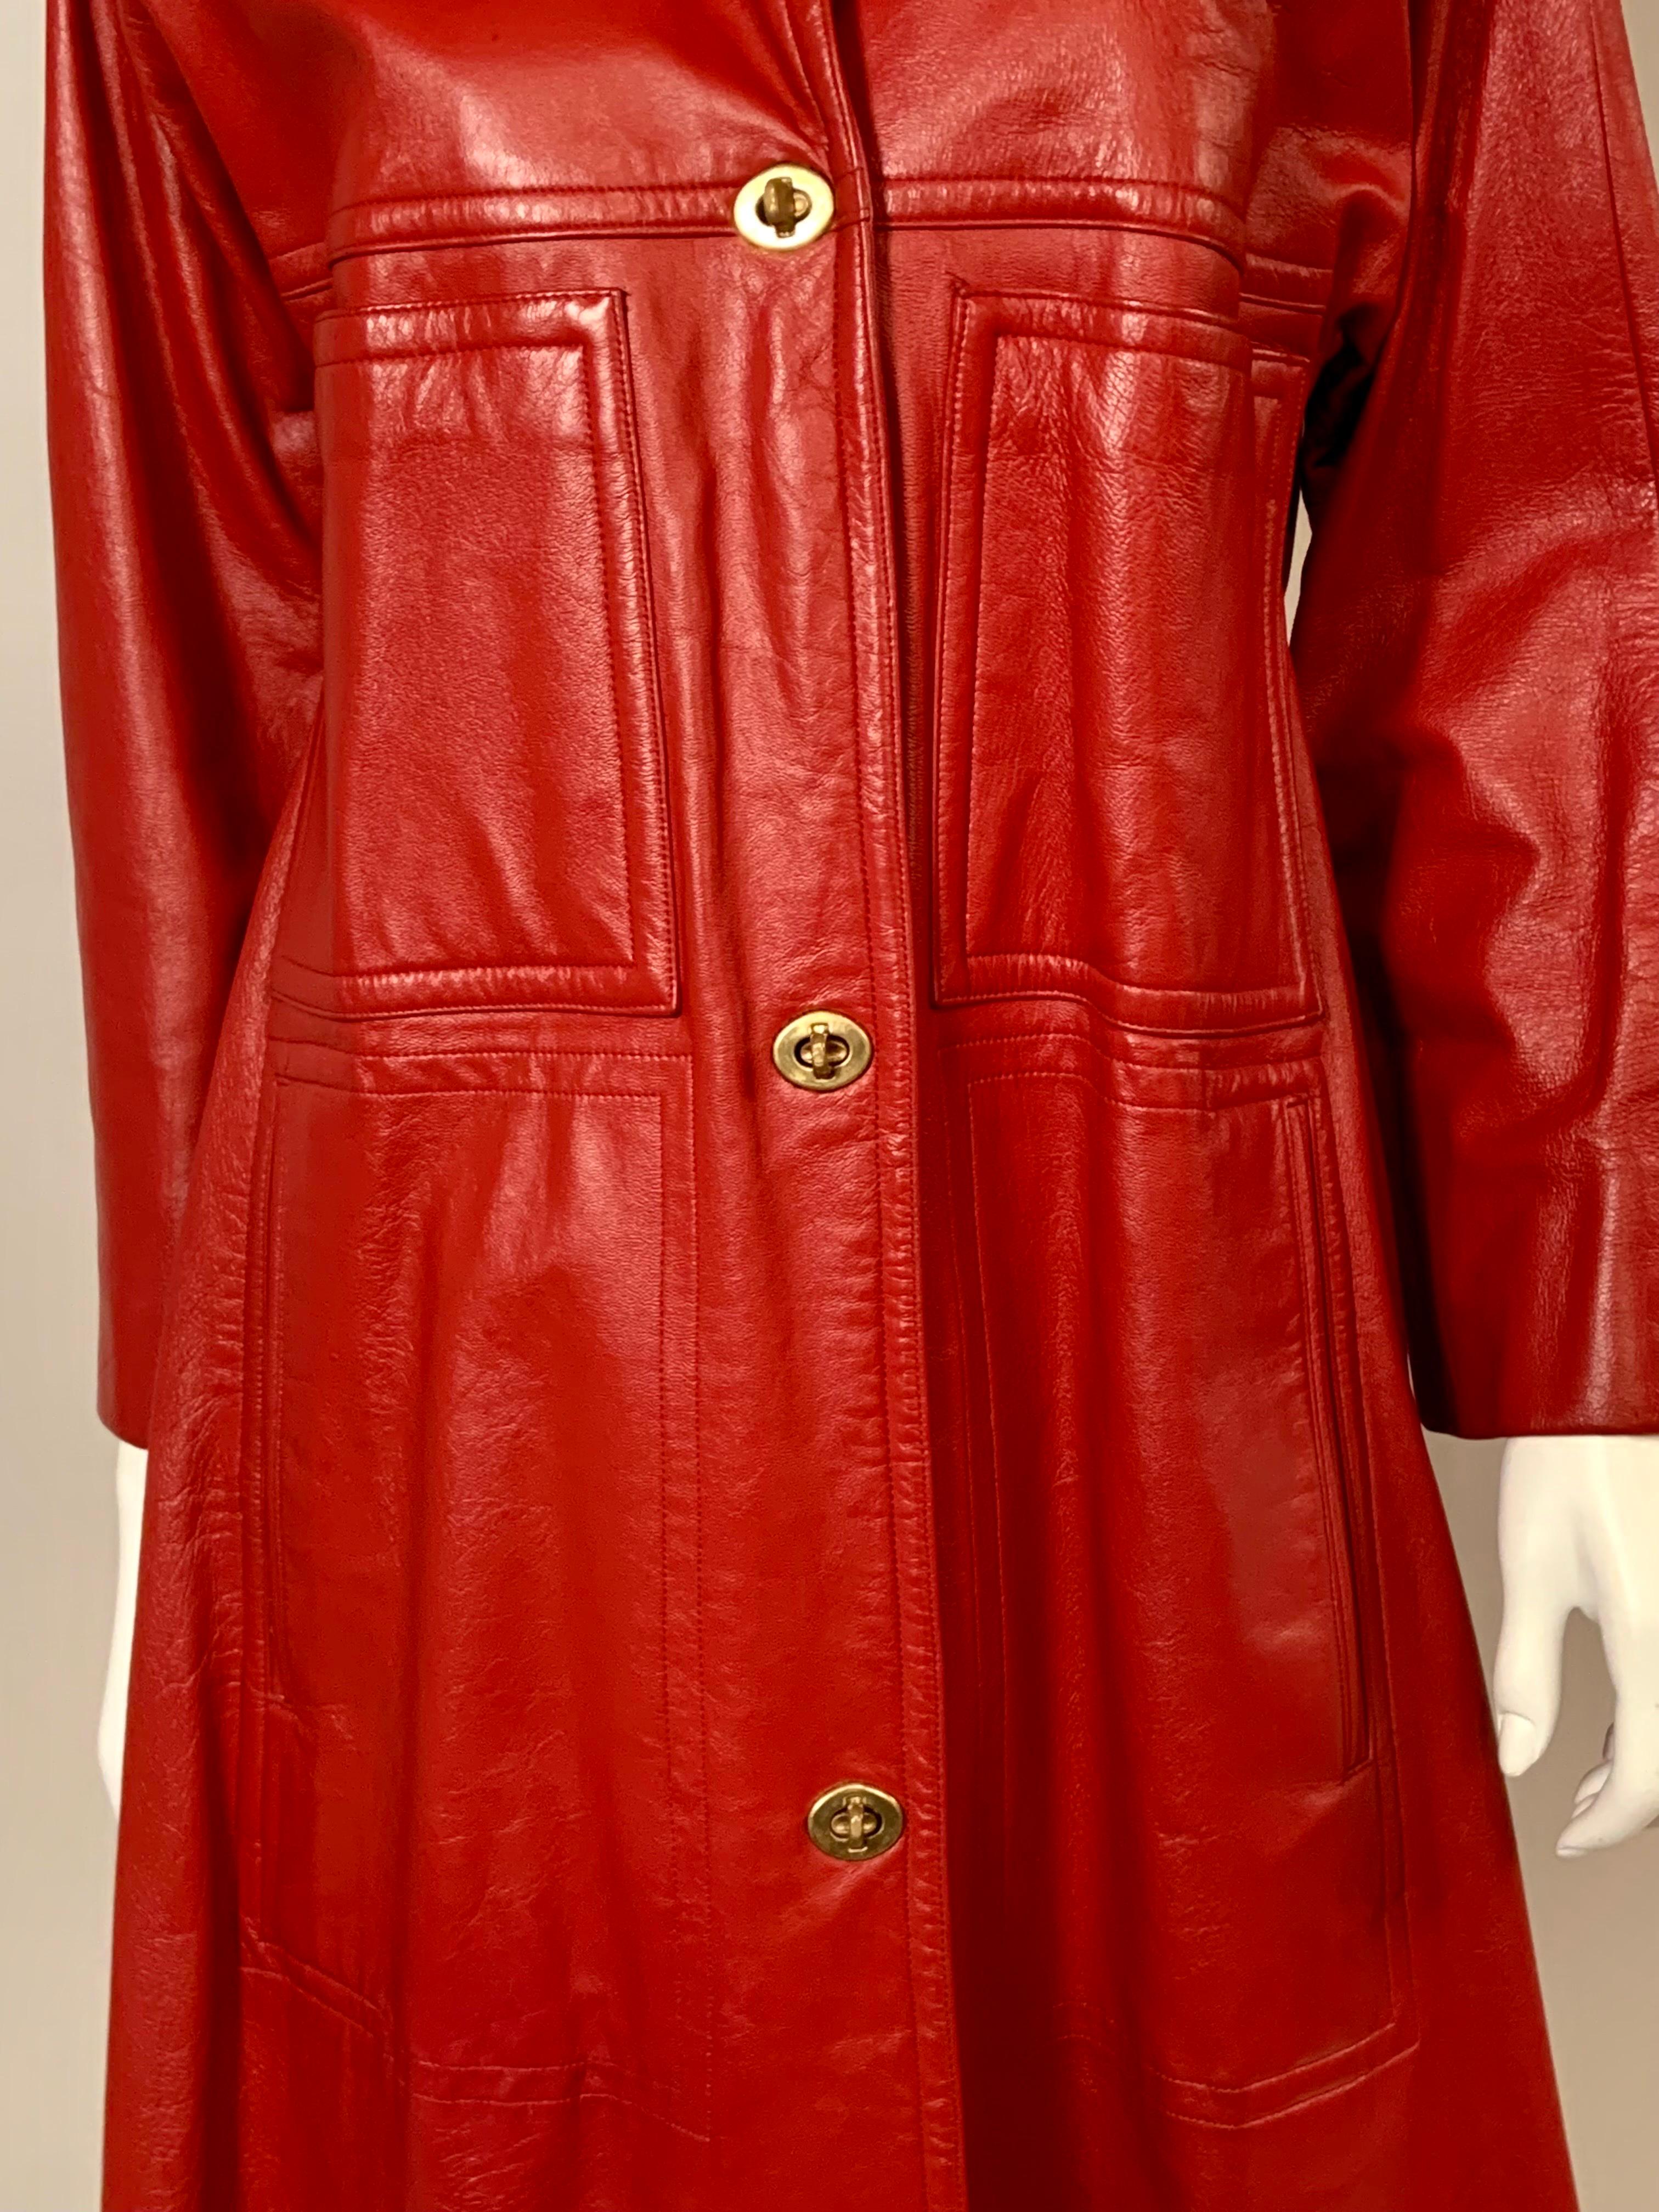 Bonnie Cashin for Sills Red Leather Coat with Brass Toggle Closures In Excellent Condition For Sale In New Hope, PA